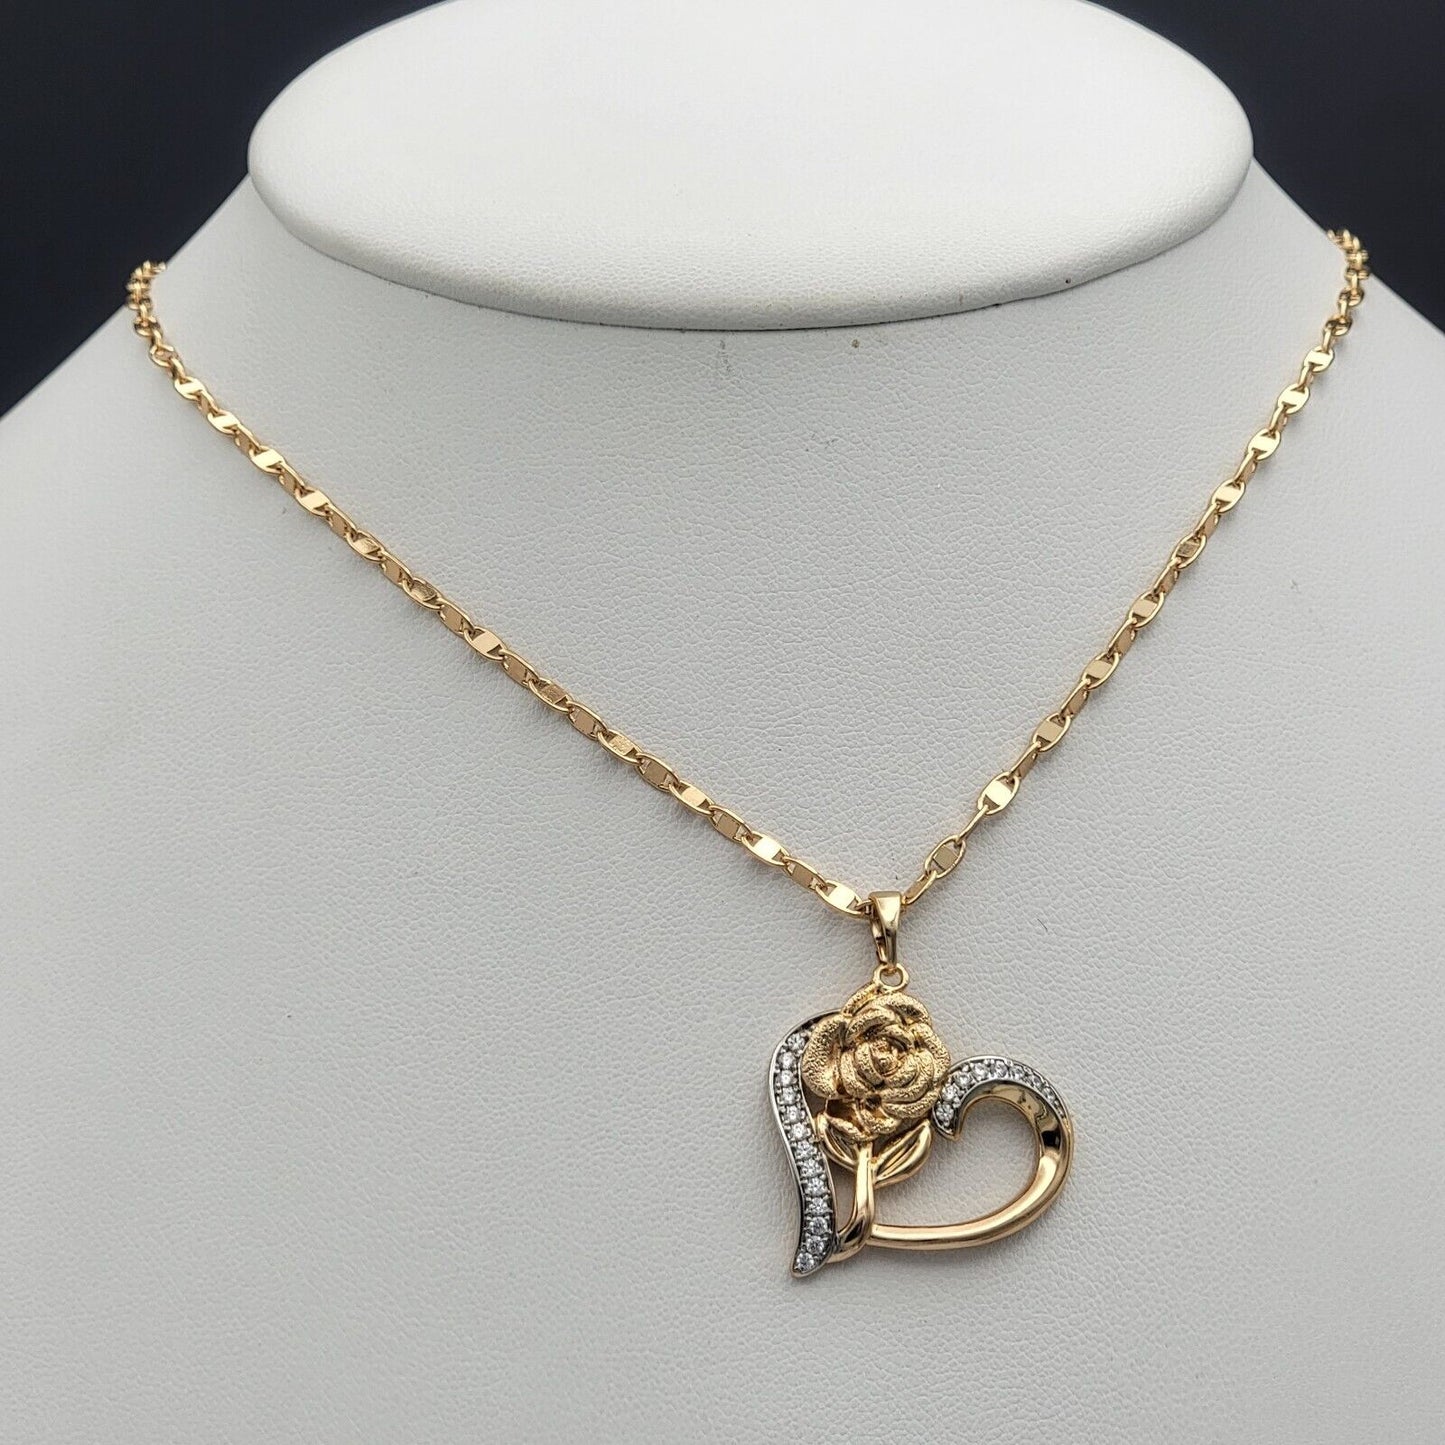 Necklaces - 18K Gold Plated. Rose Flower Heart Pendant & Chain.